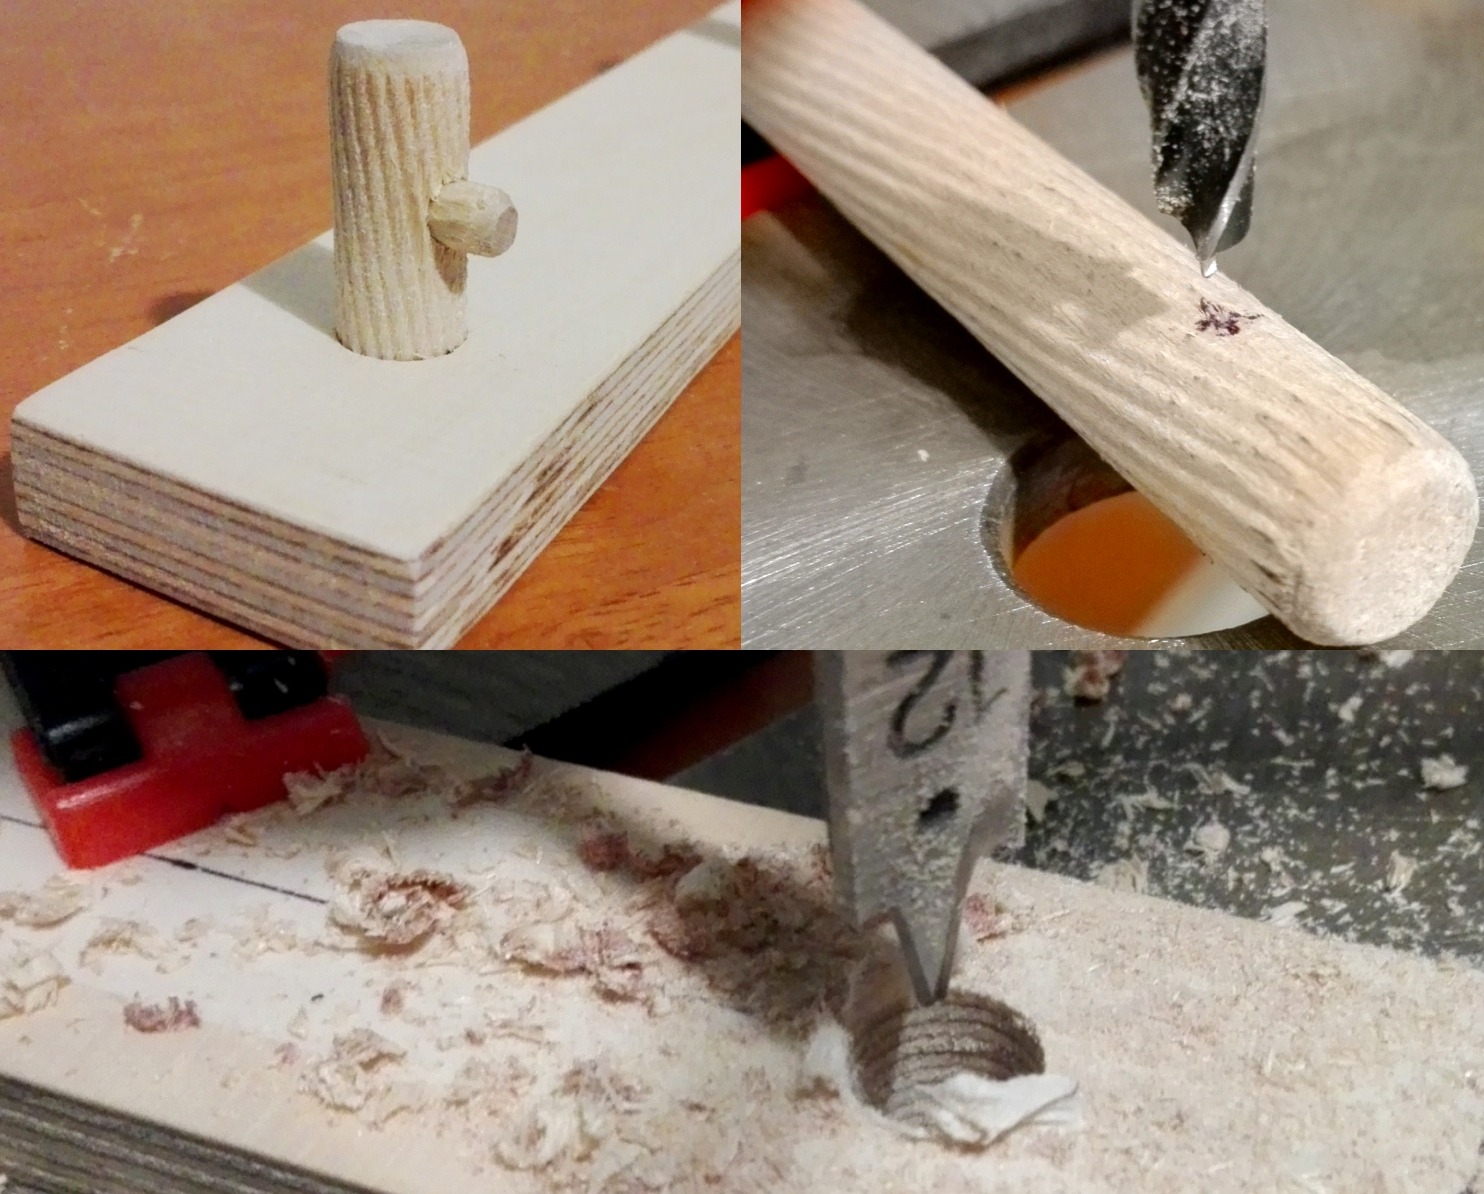 http://diyprojects.eu/wp-content/uploads/2018/02/drilling-holes-into-12mm-dowels-and-12mm-plywood.jpg